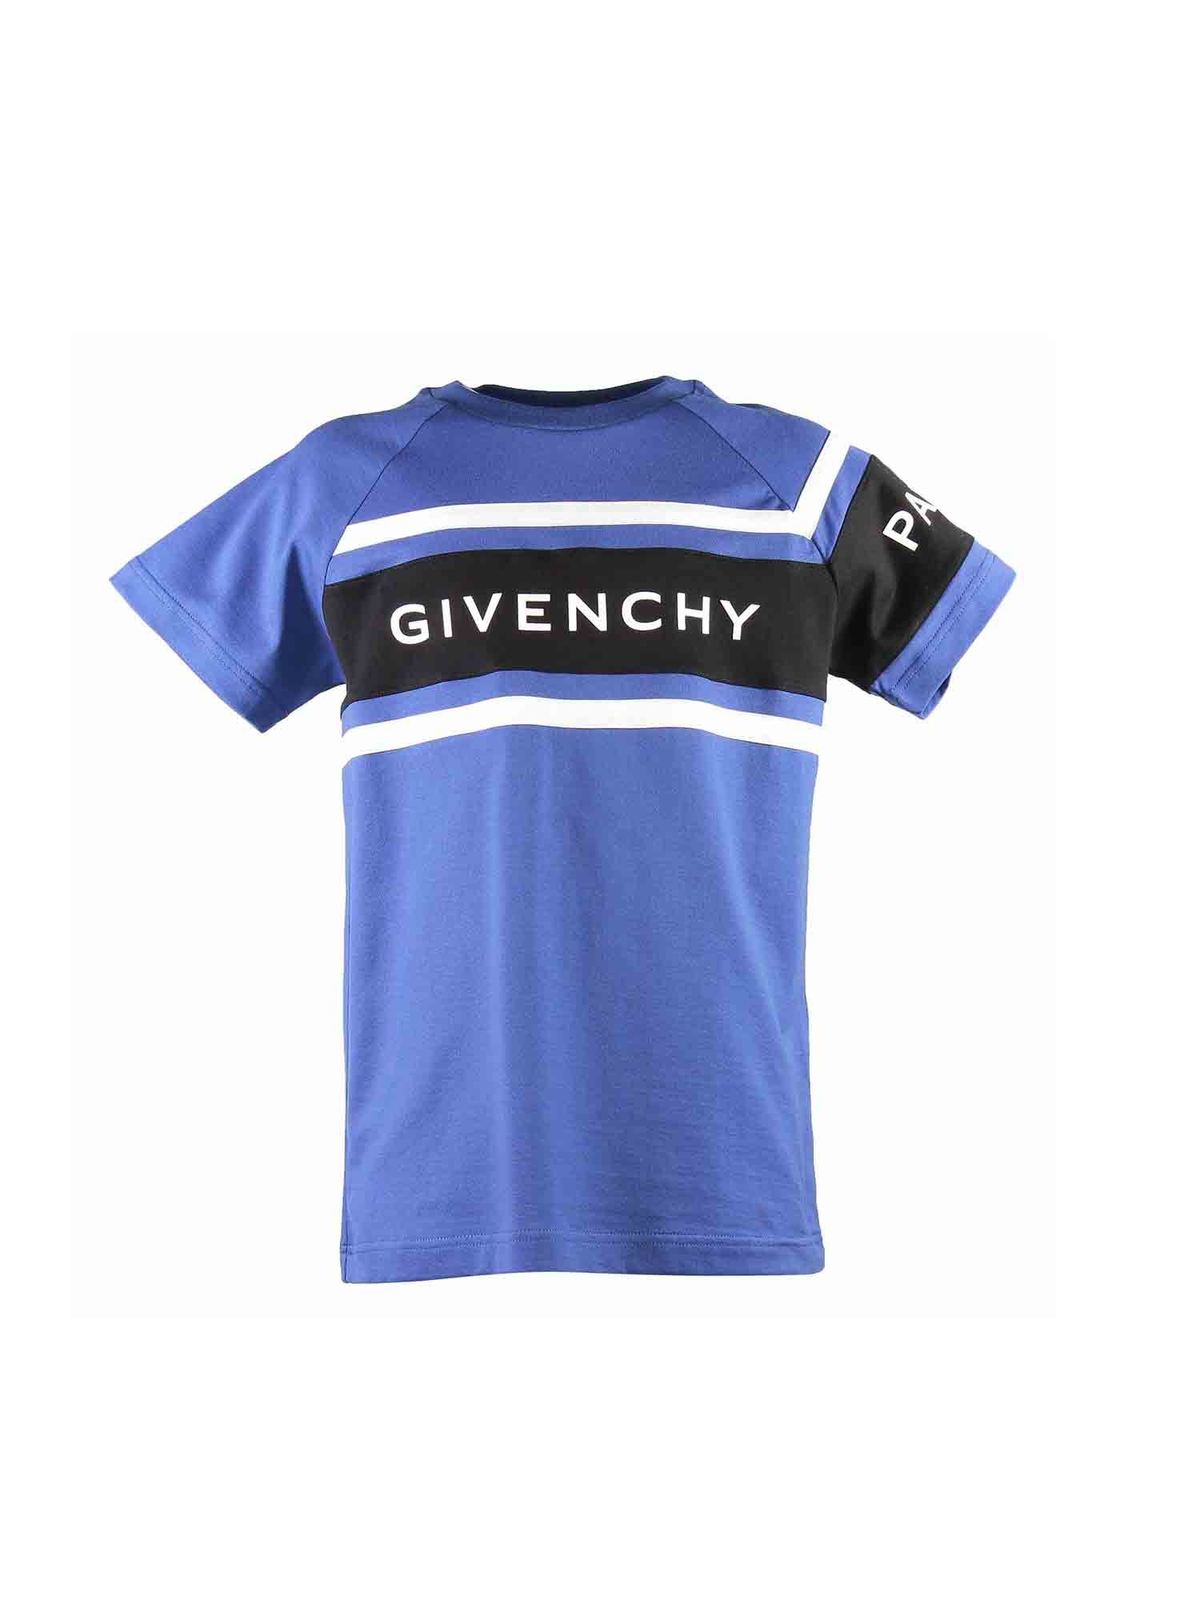 GIVENCHY BRANDED T-SHIRT IN BLUE COTTON JERSEY